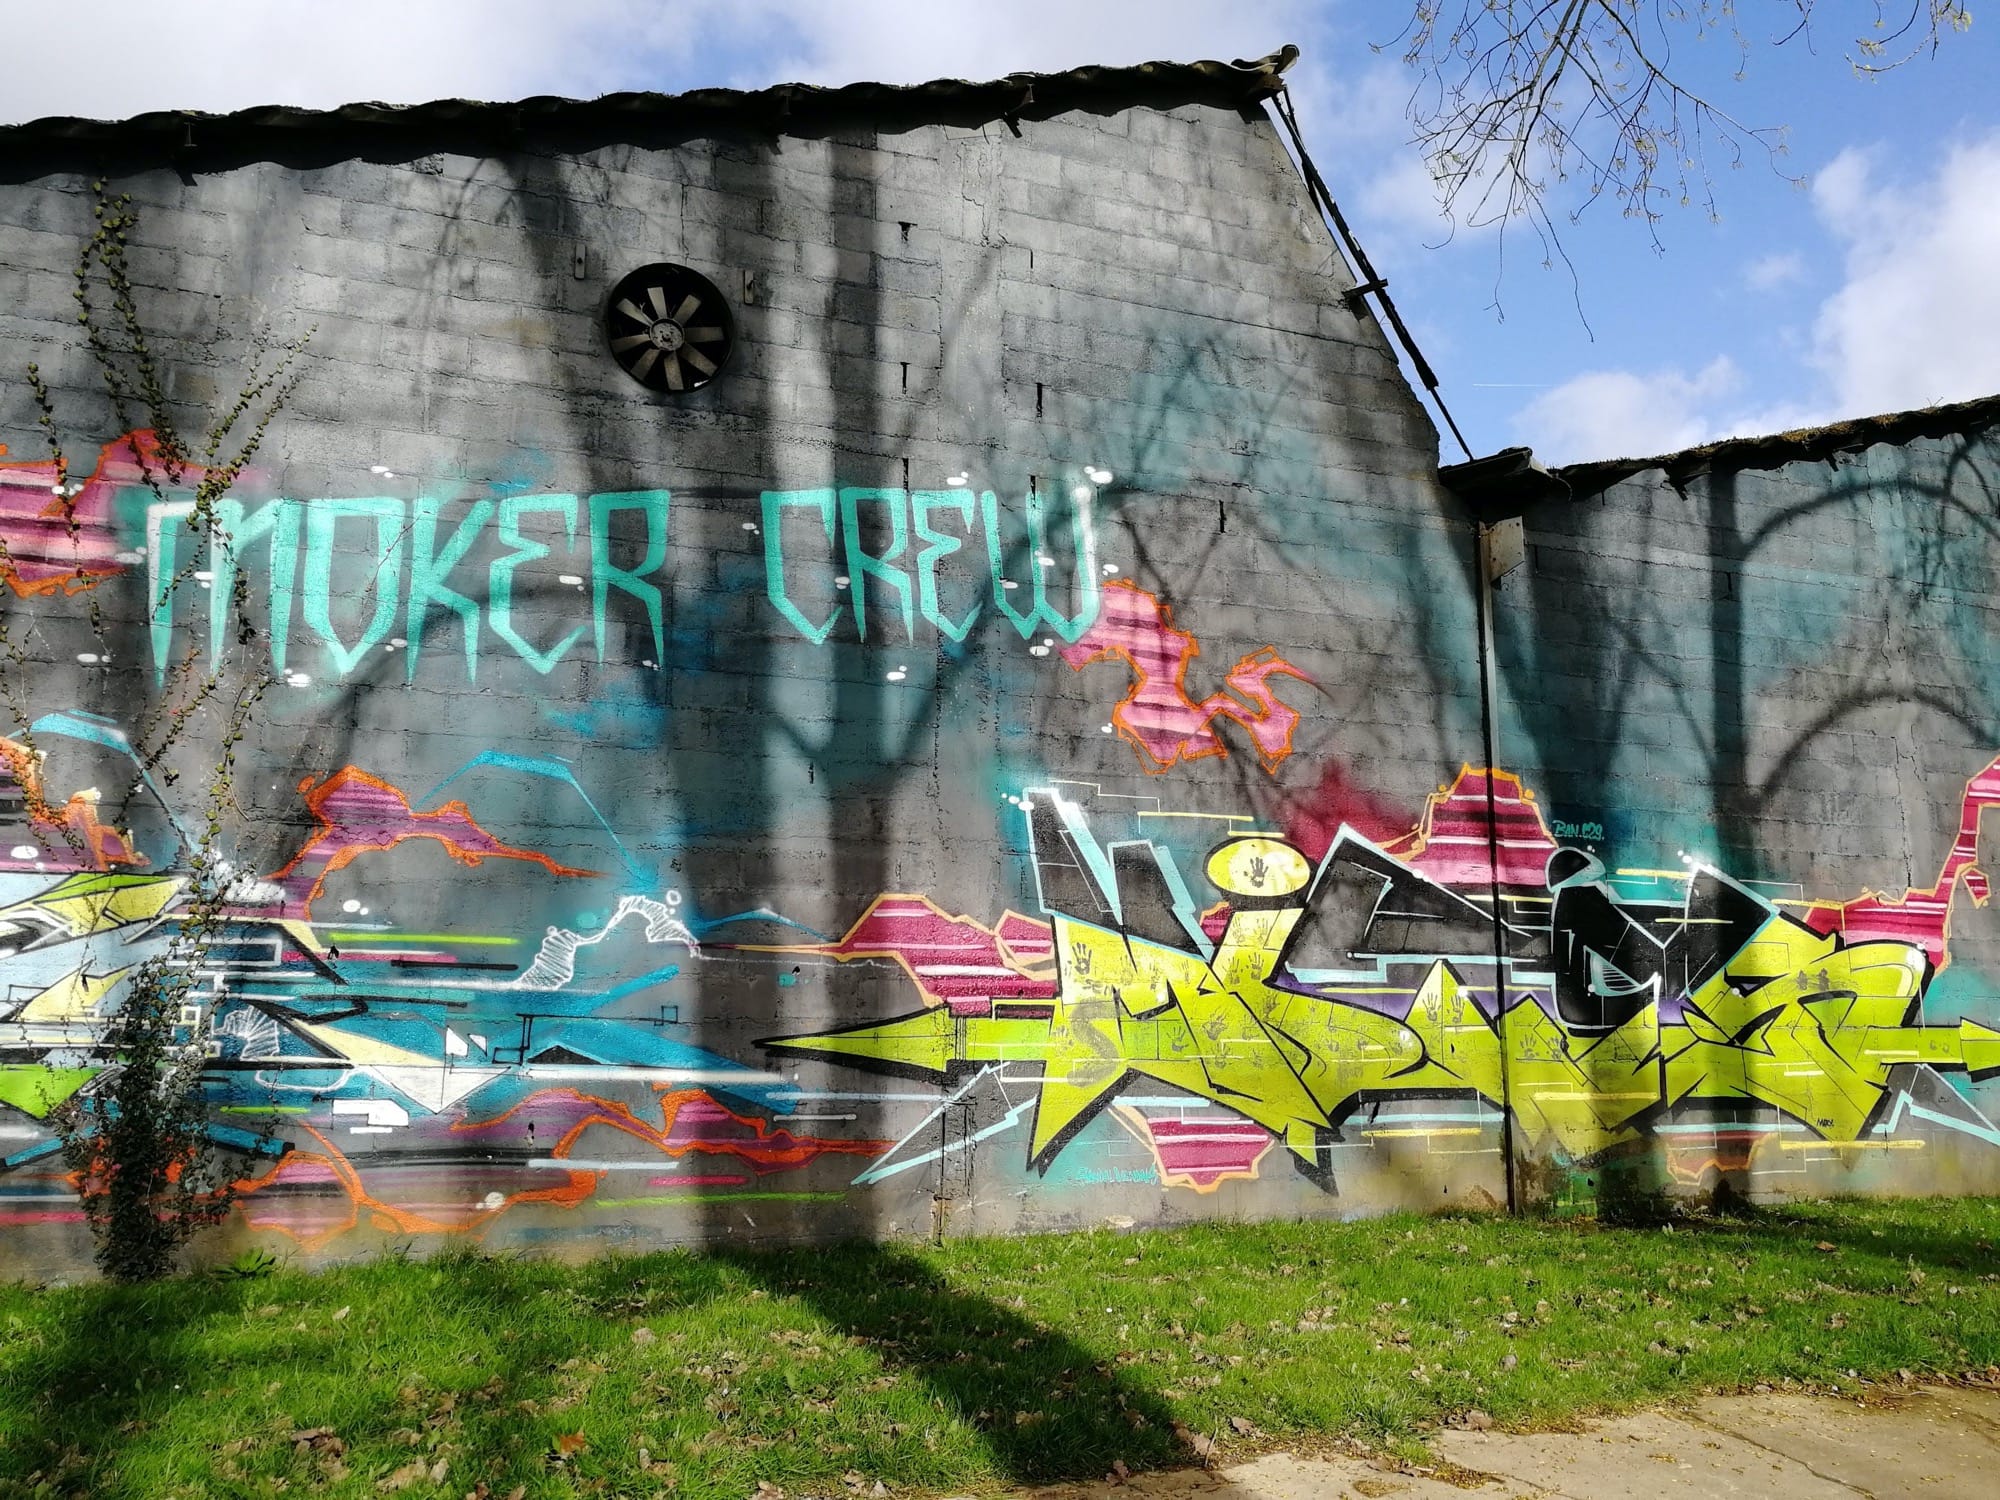 Graffiti 1215  captured by Rabot in Redon France